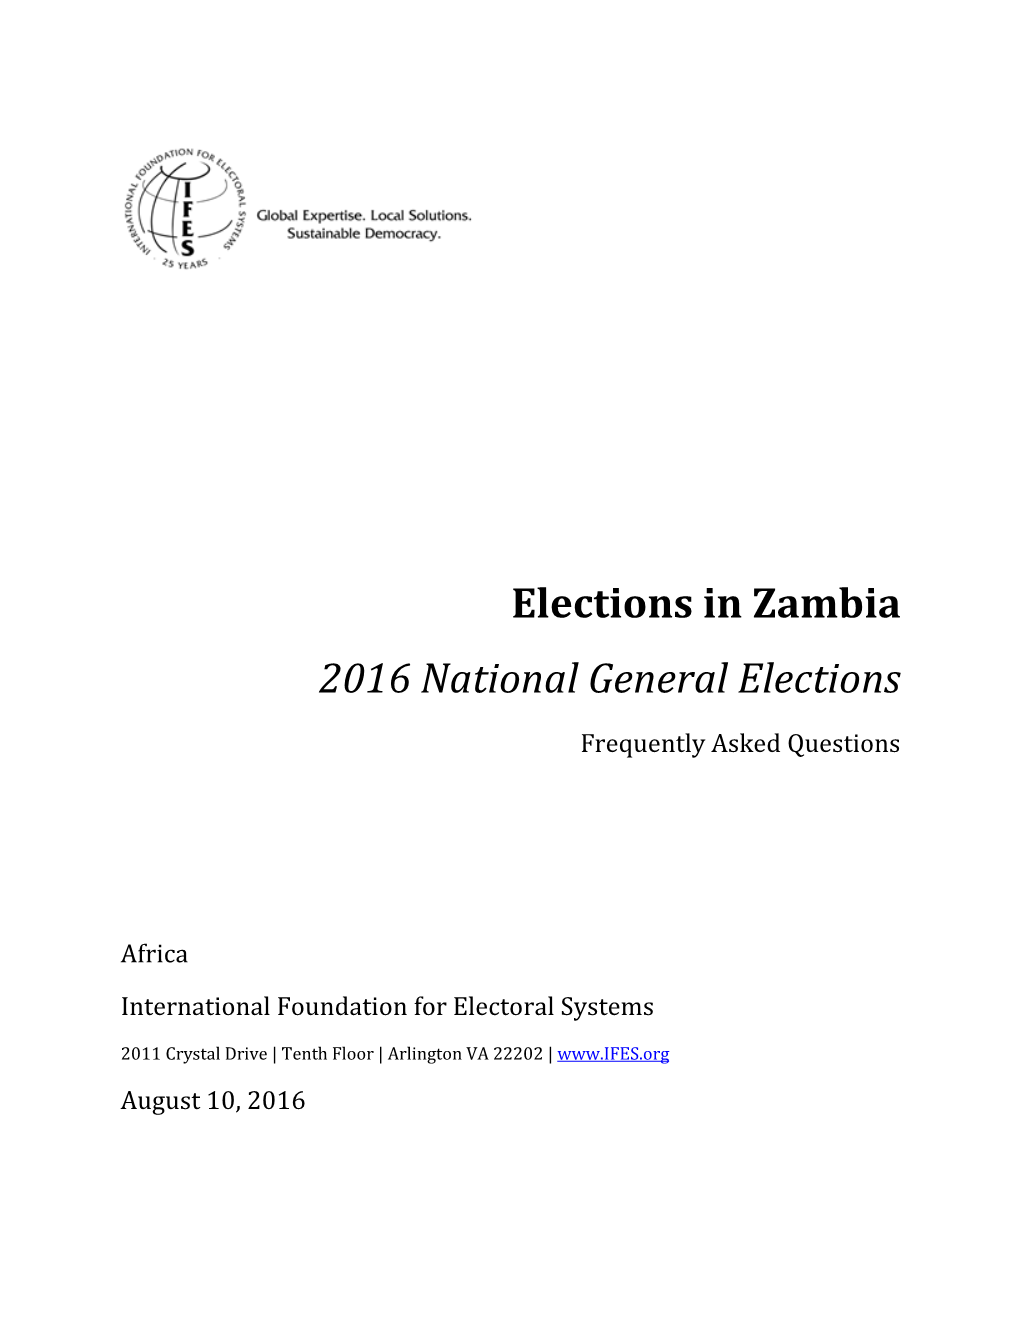 Elections in Zambia: 2016 National General Elections Frequently Asked Questions